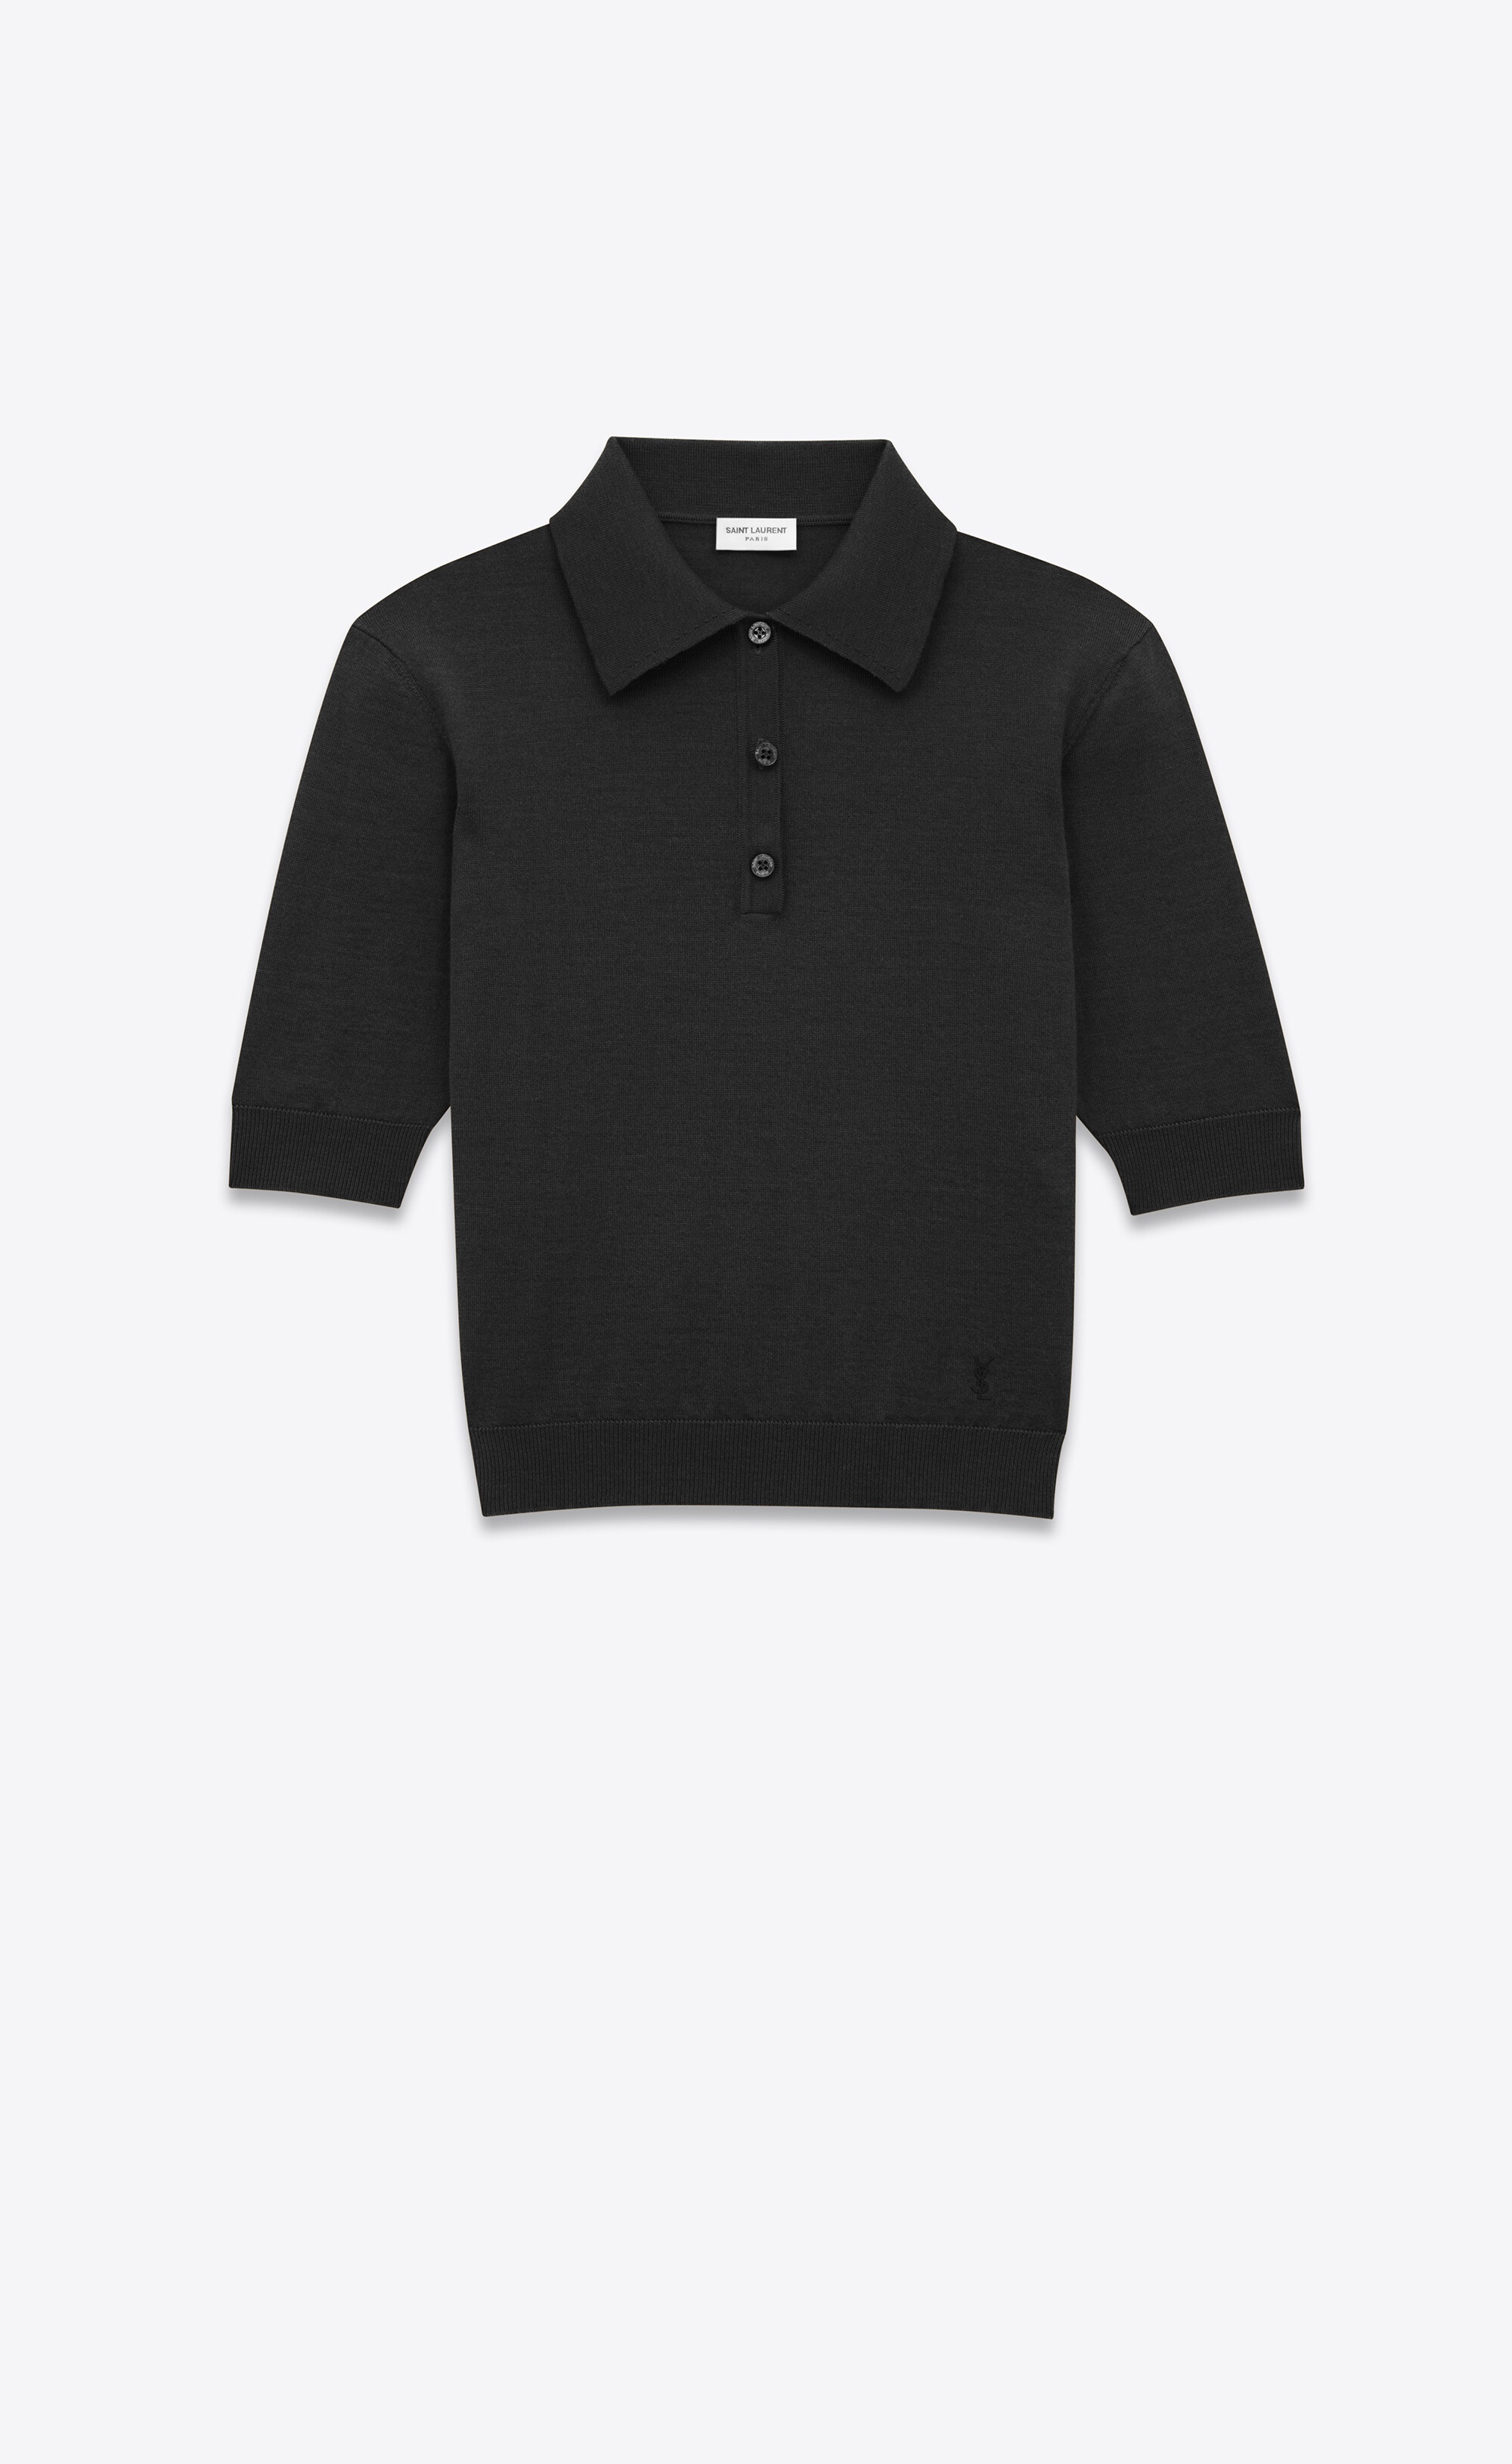 cassandre polo shirt in cashmere, wool, and silk - 1